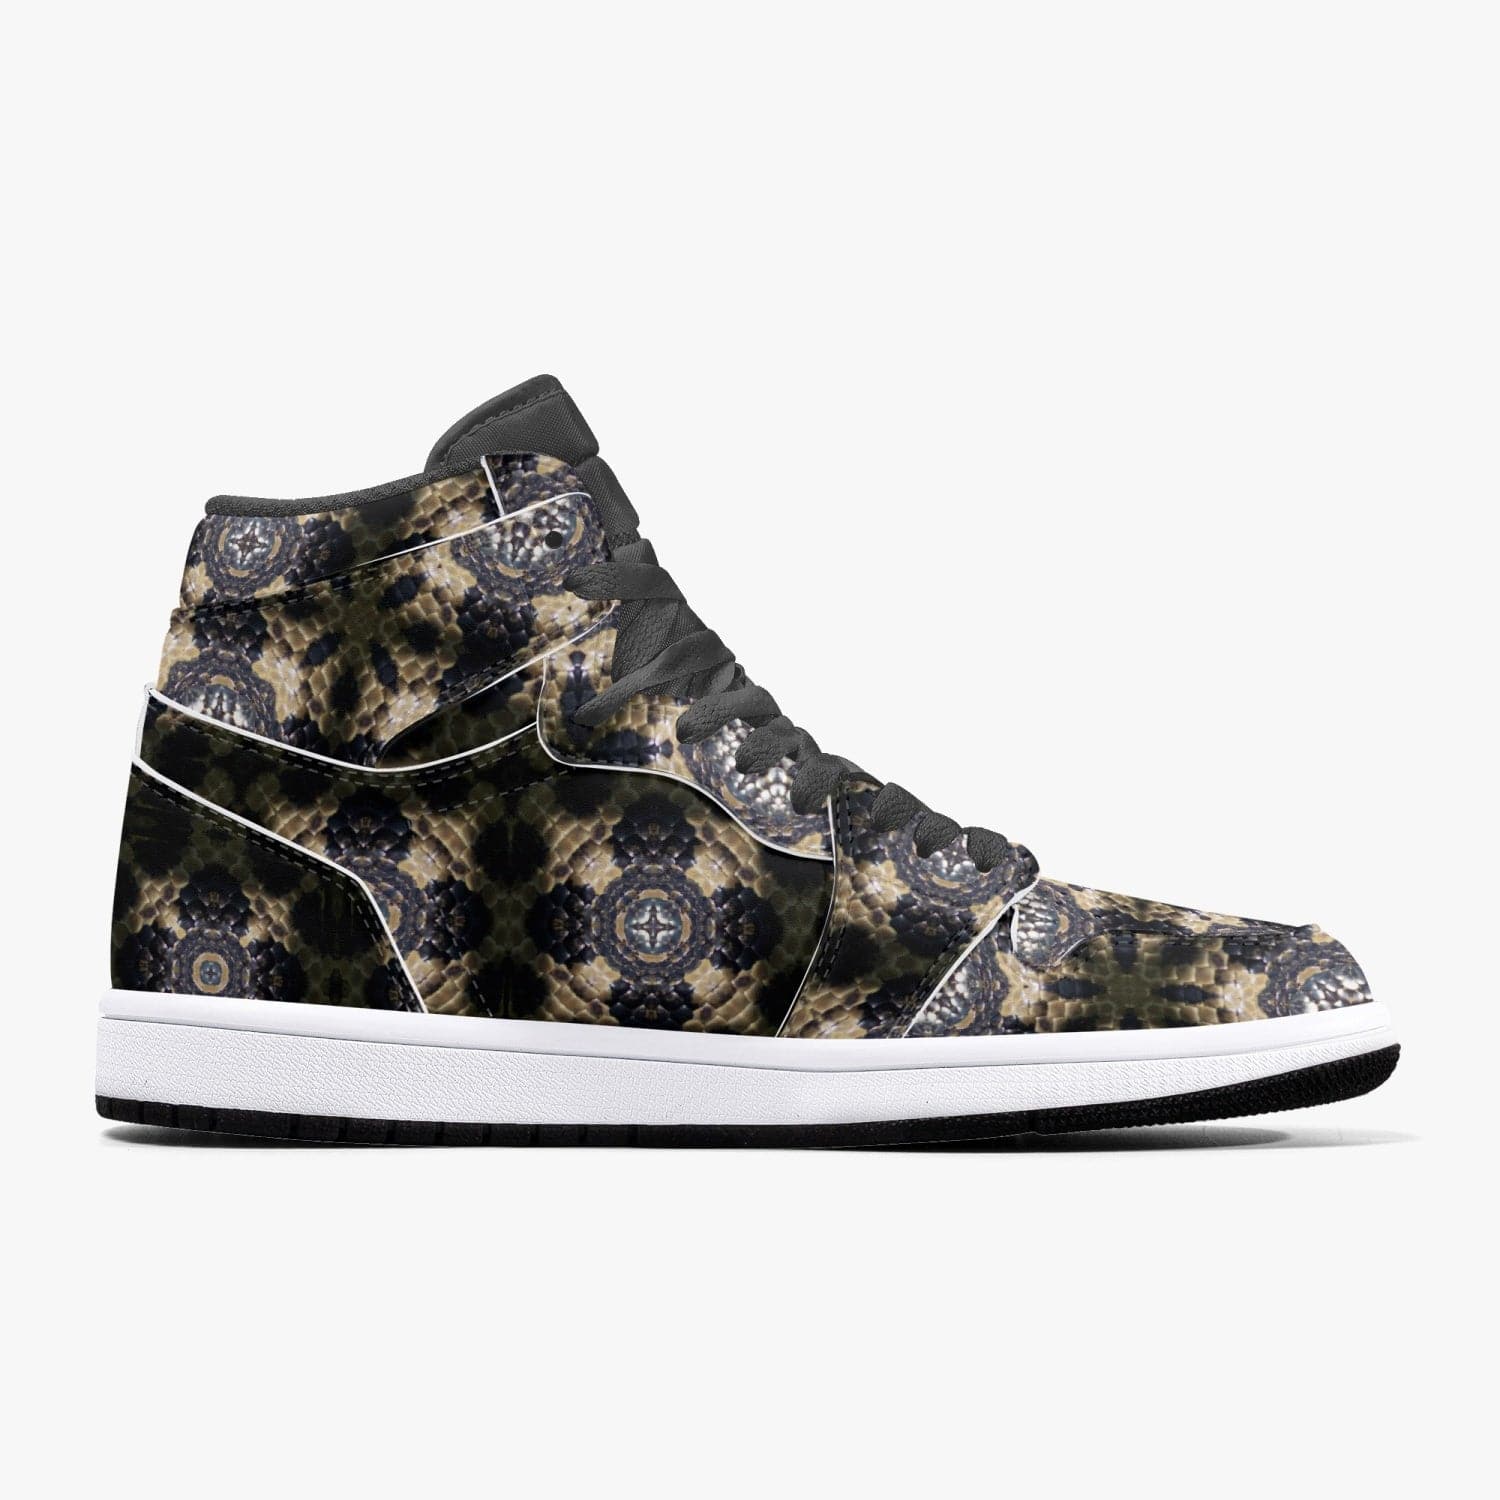 Rattle Snake Crossed pattern New Black High-Top Leather Sneakers for Men, by Sensus Studio Design